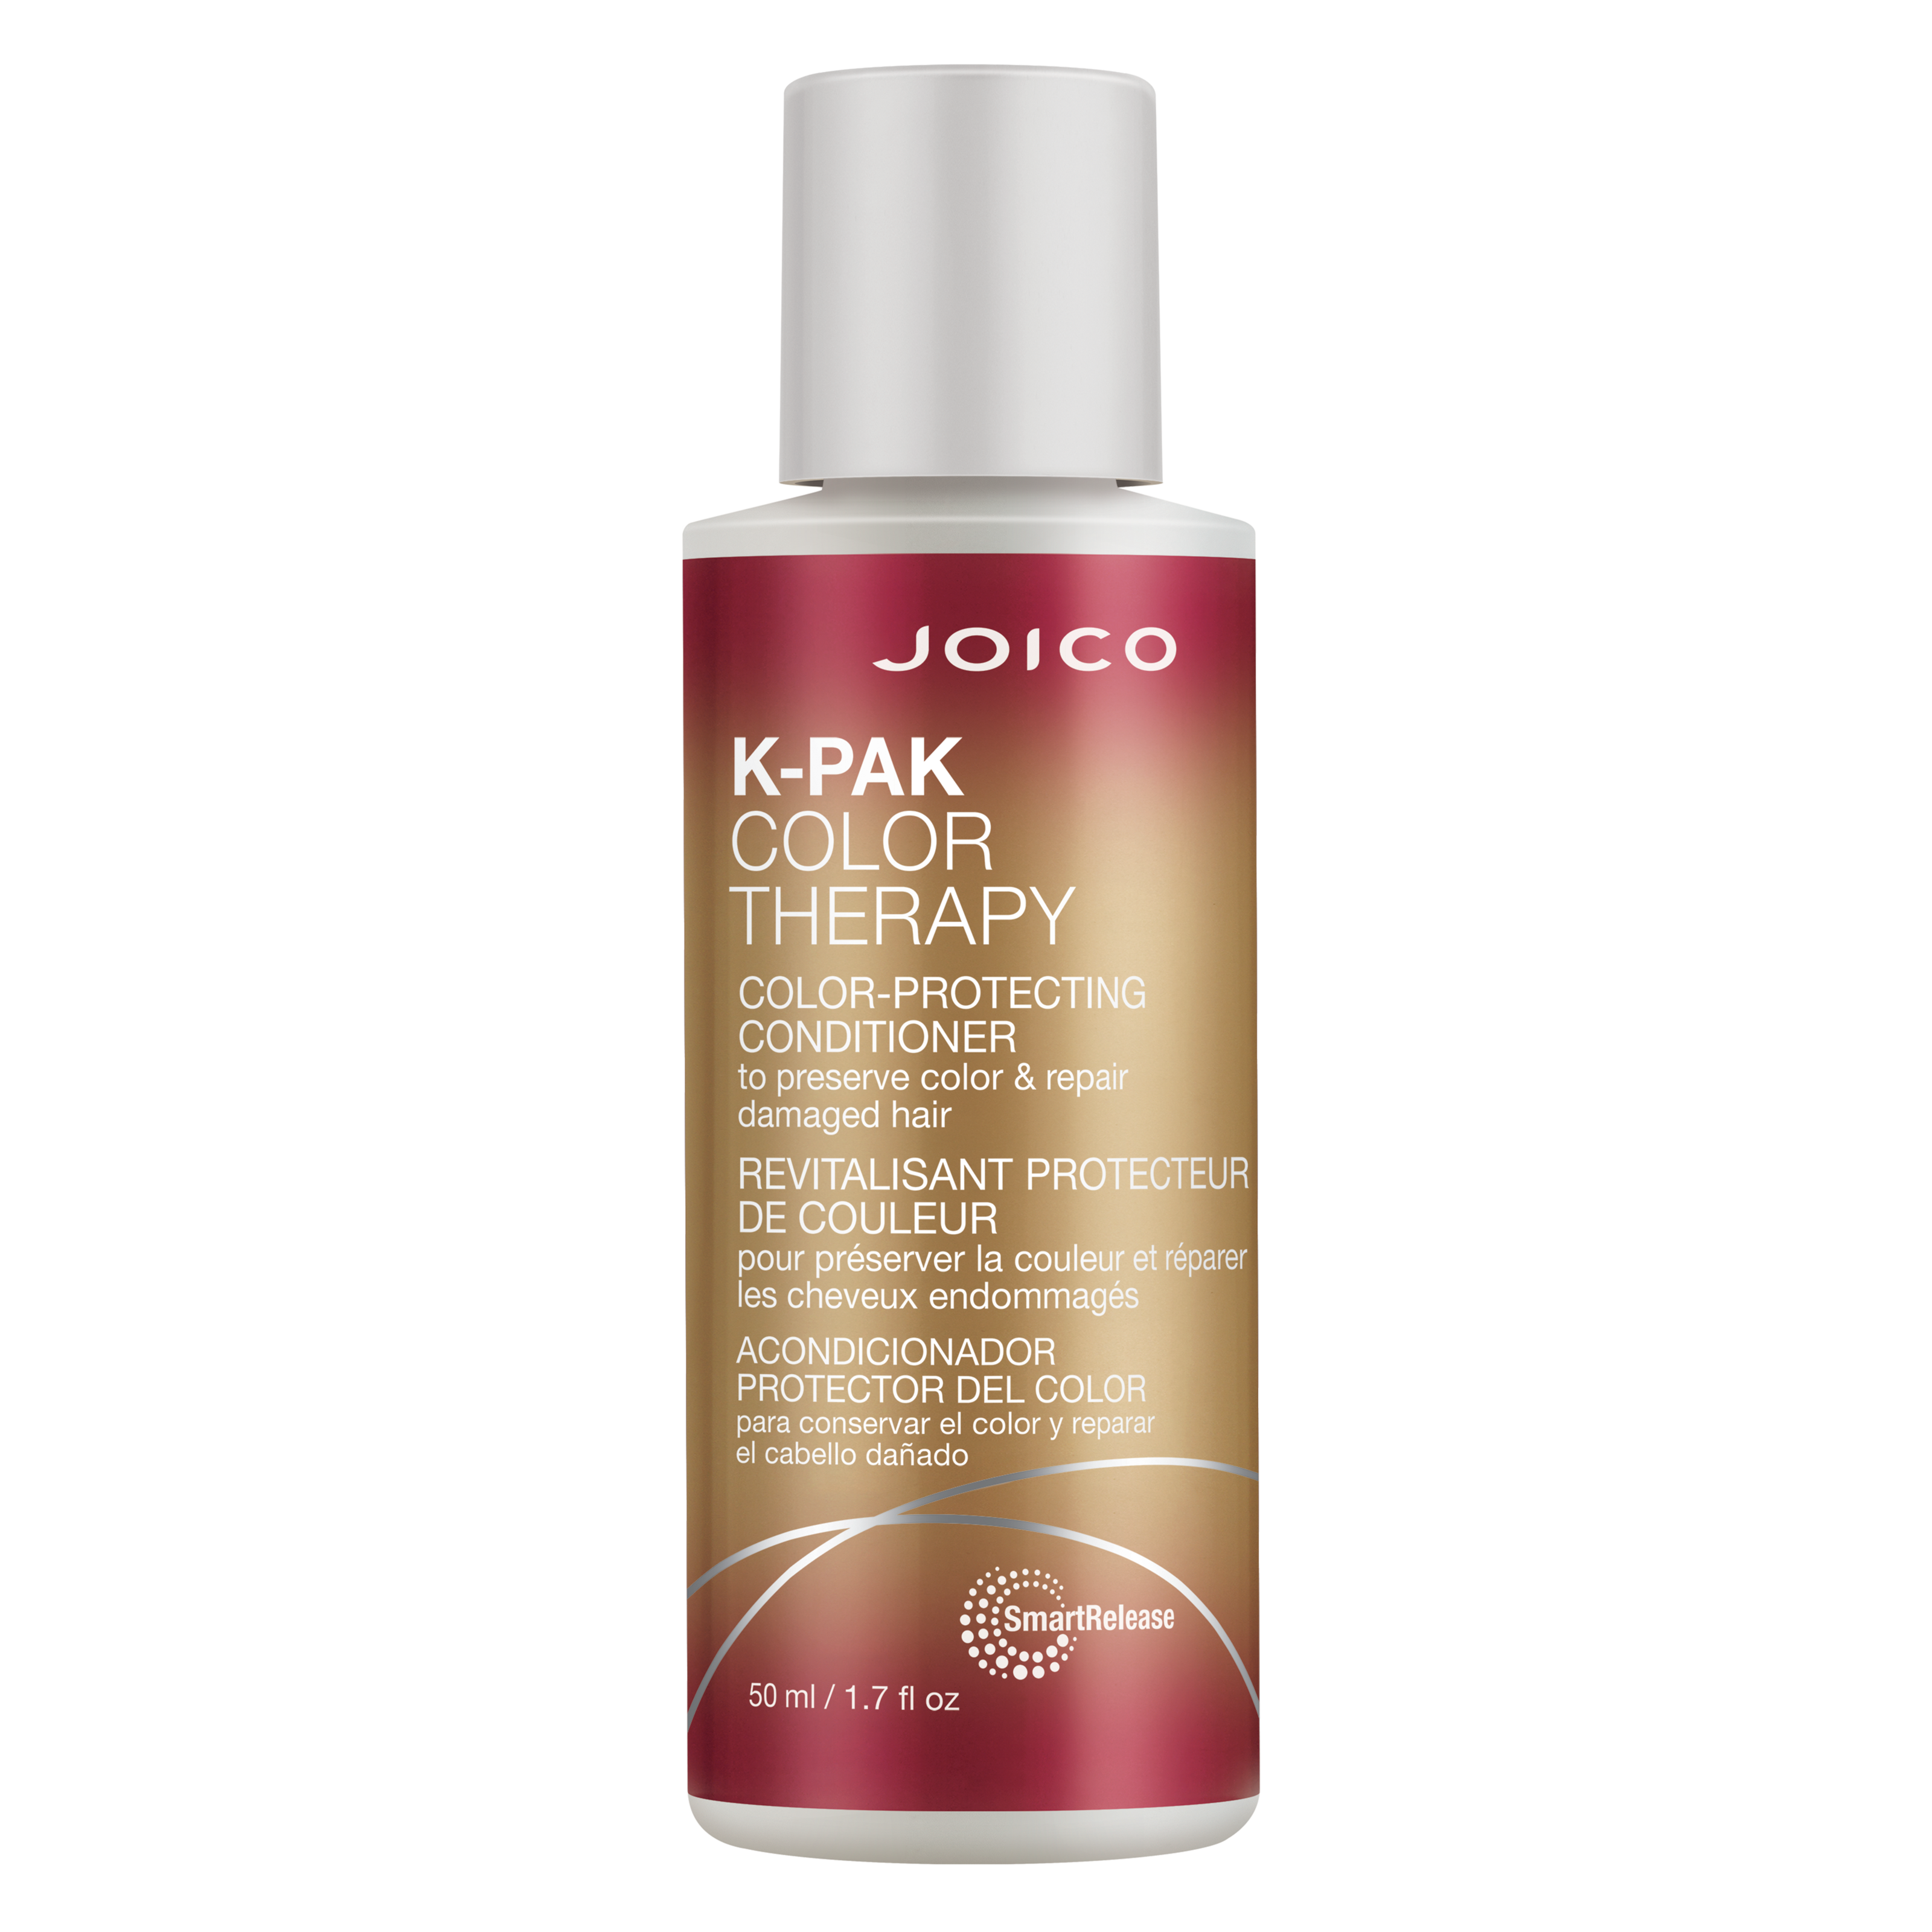 Läs mer om Joico K-pak Color Therapy Color-Protecting Conditioner 50 ml